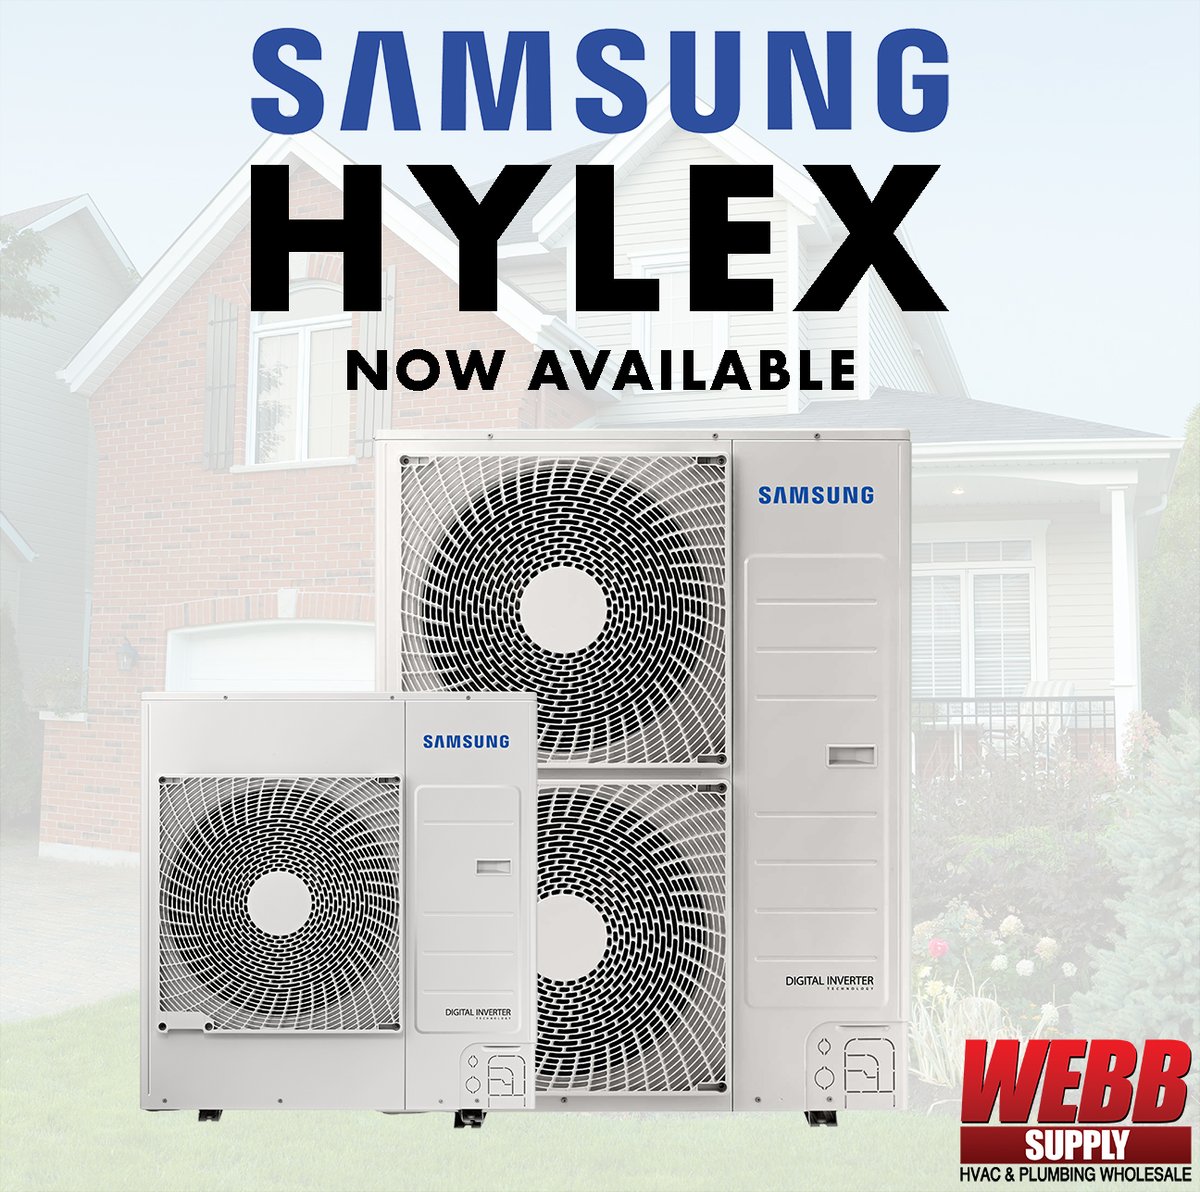 The @SamsungHVAC_NA Hylex Heat Pump is now available at Webb Supply! Give your customers the efficiency they need while cutting down install times. Learn more at ow.ly/zkhK50NoeKE

#samsunghvac #hylex #heatpump #hvaclife #hvacinstall #hvaccontractor #hvaclife #heatingohio